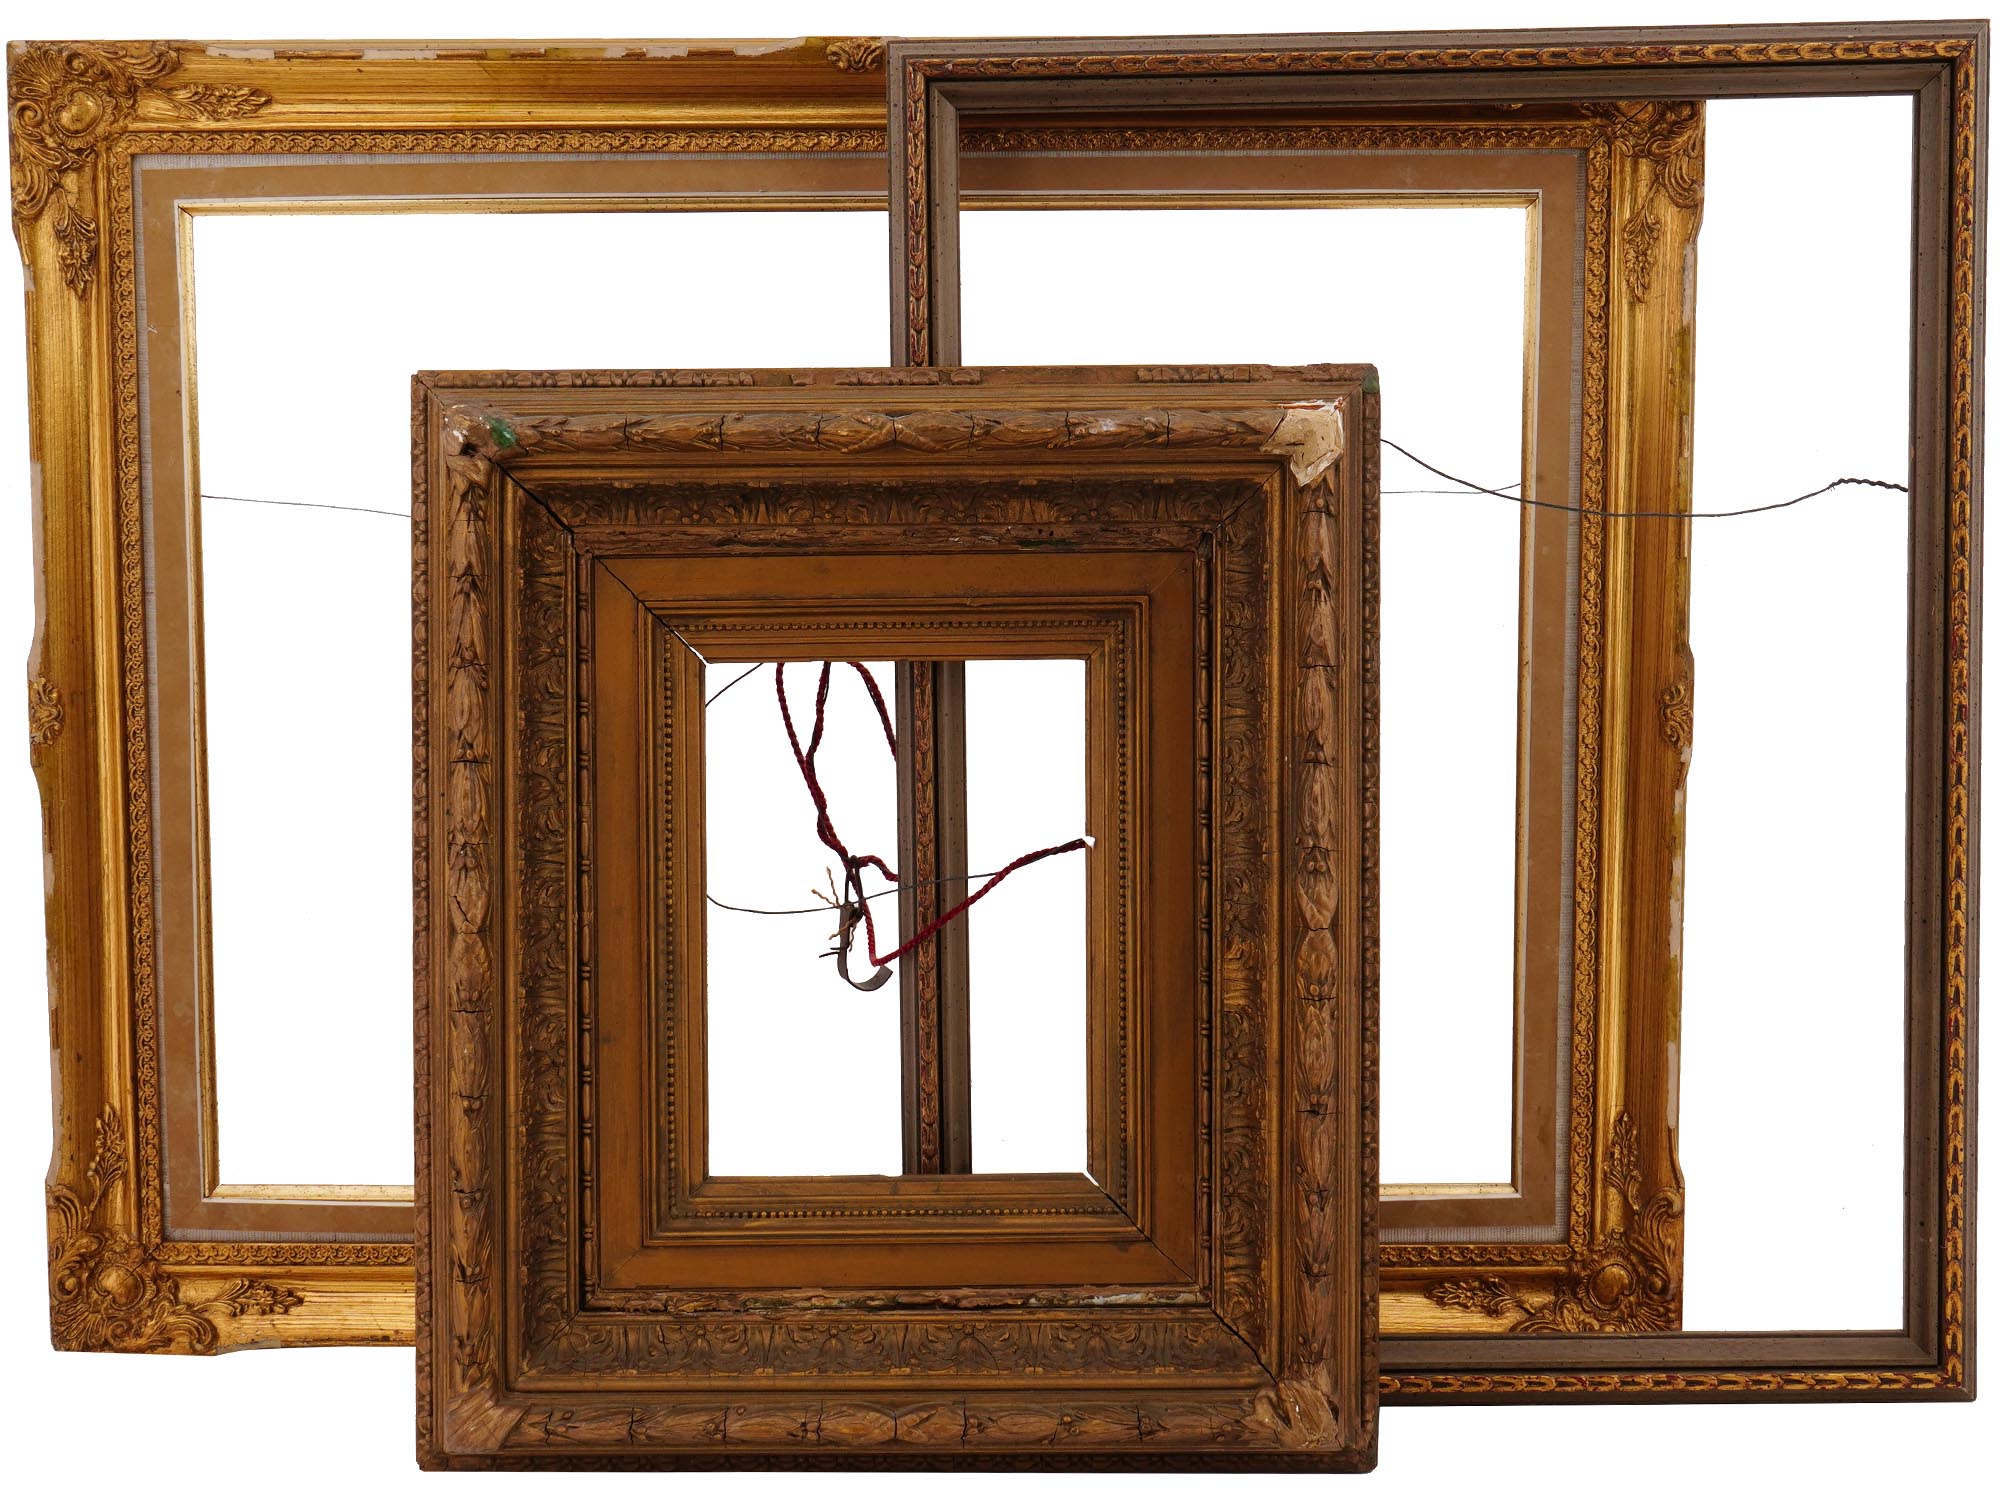 ANTIQUE ORNATE GILT WOODEN PICTURE FRAMES PIC-0